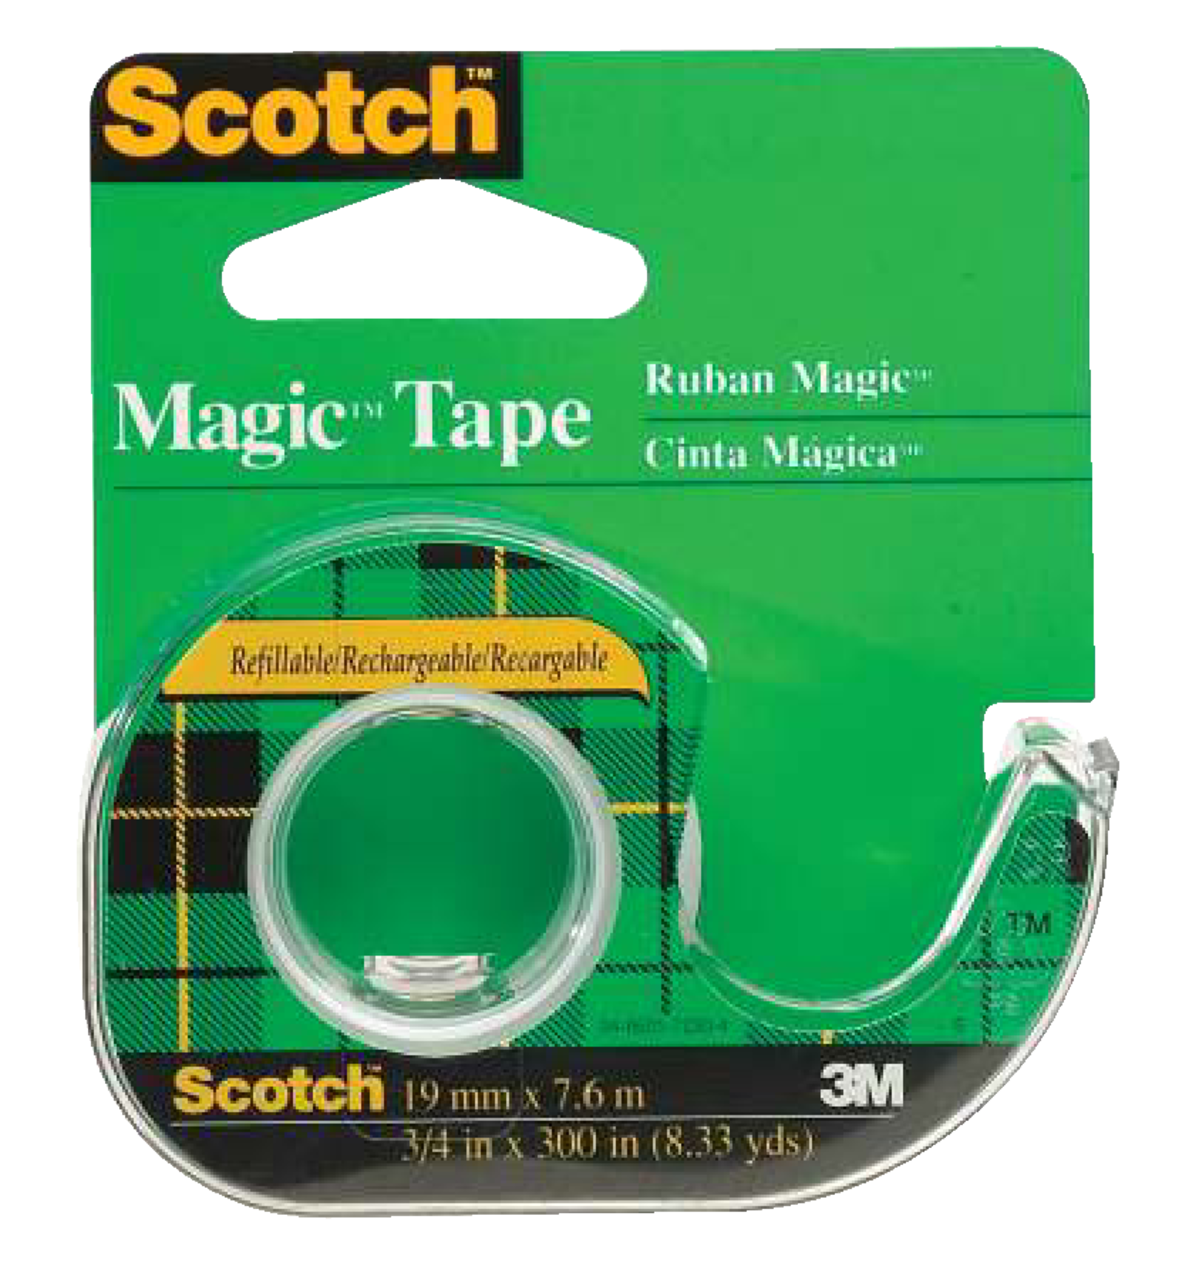 3M Scotch Magic Tape with Refillable Dispenser For Gift  Wrapping/Office/Home, 19-mm x 17.6-m